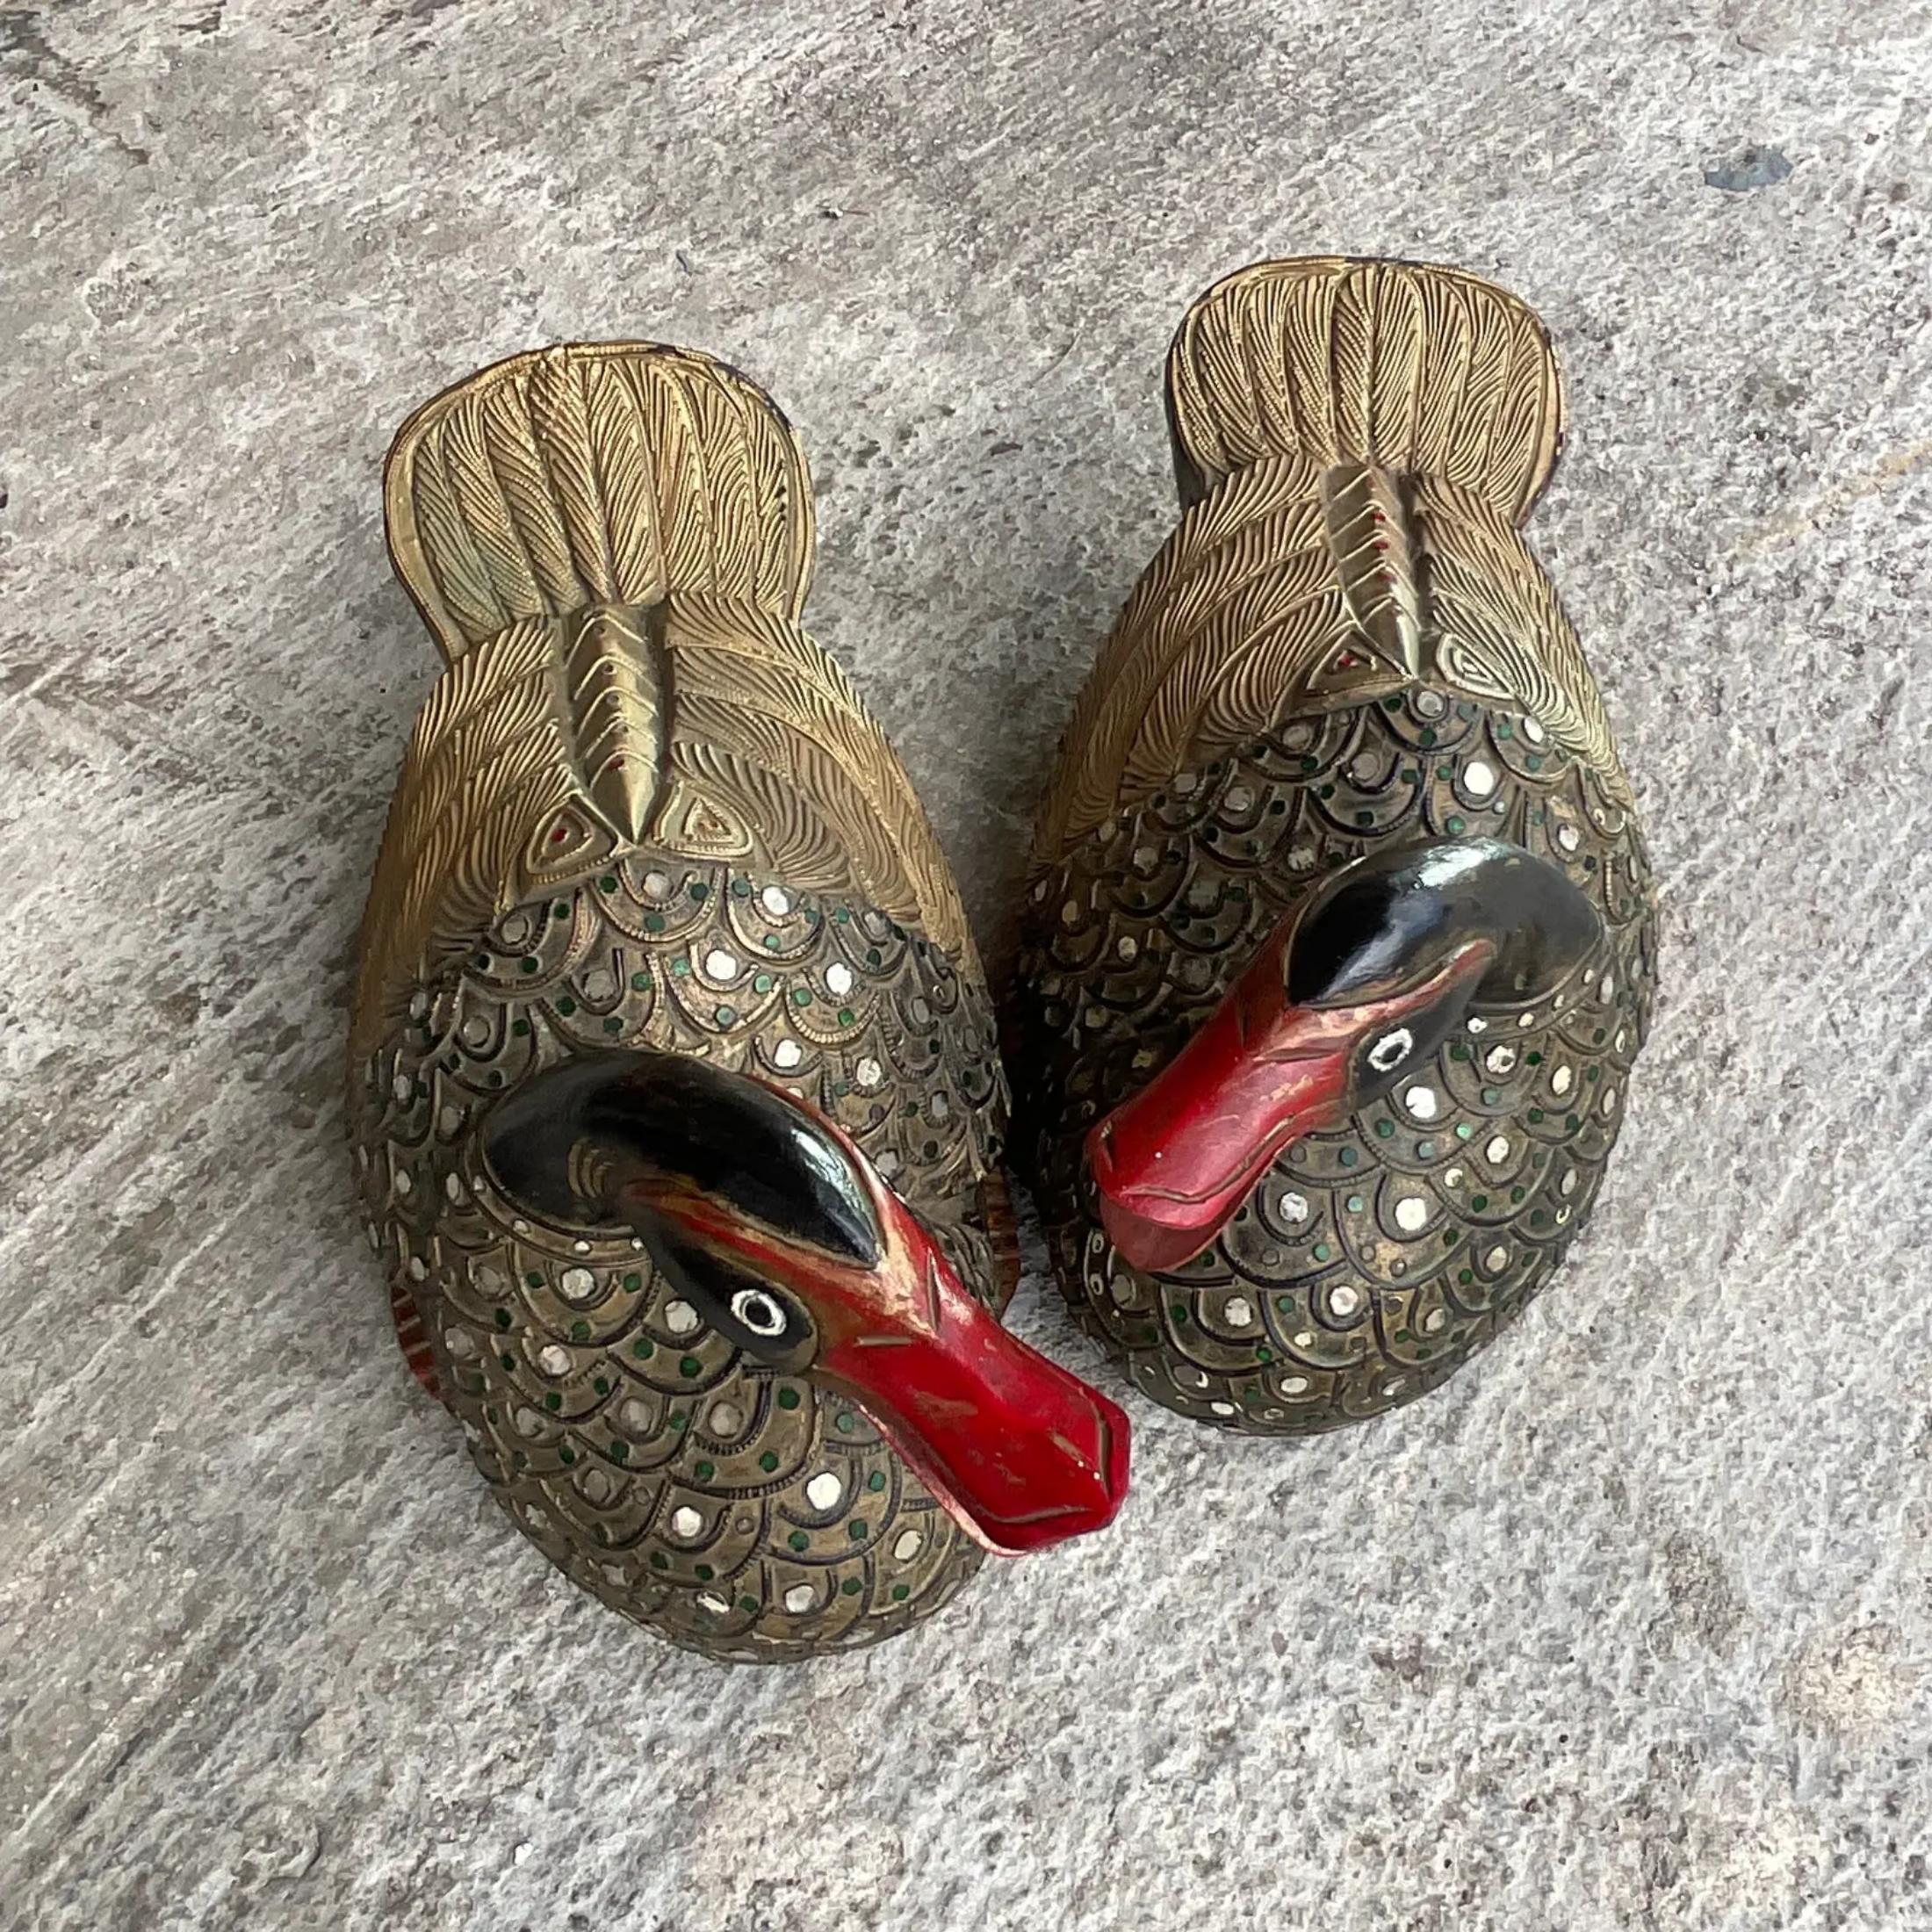 Armenian Vintage Boho Carved Wooden Ducks - a Pair For Sale